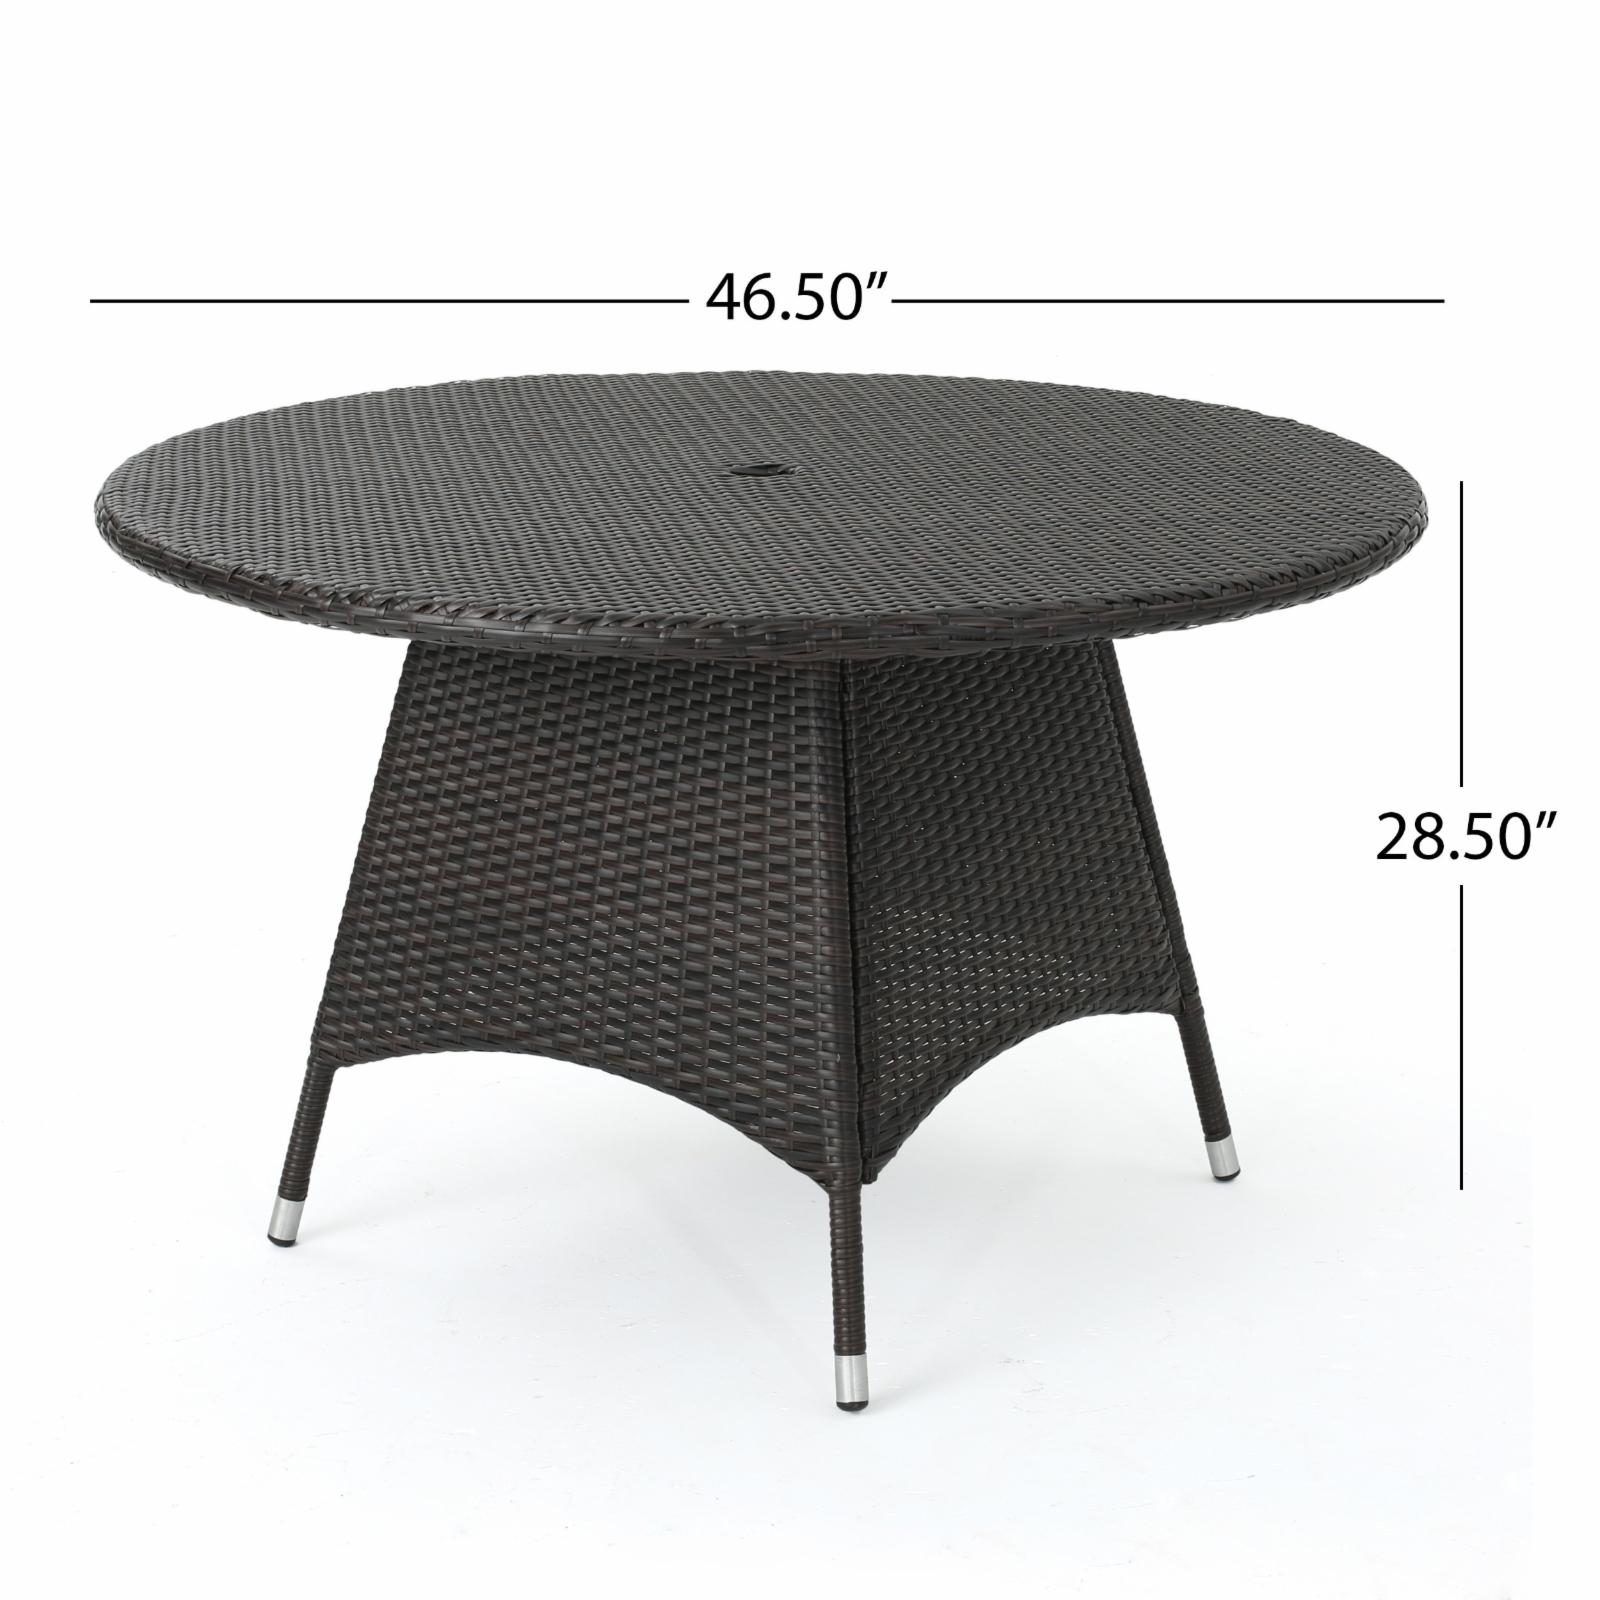 Corsica Round Patio Dining Table - image 5 of 7